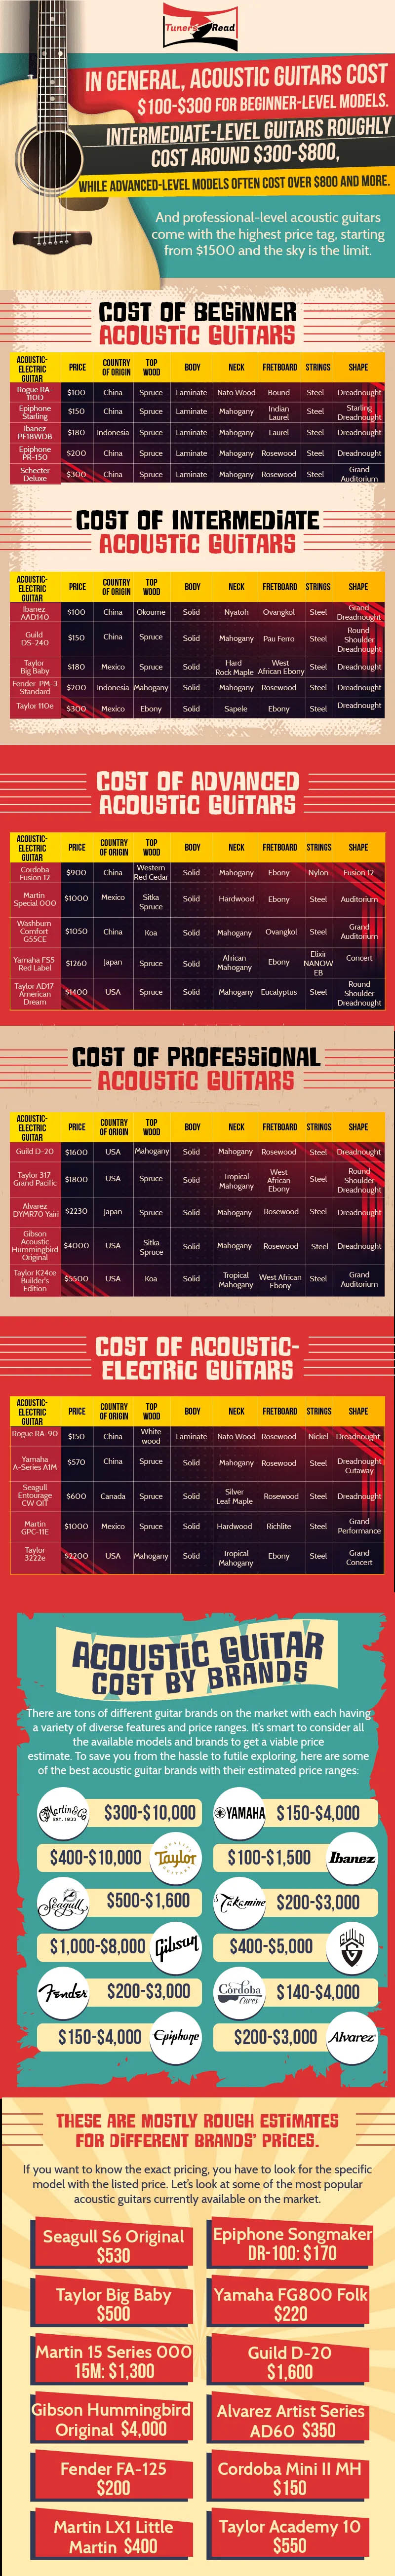 How Much Does an Acoustic Guitar Cost?